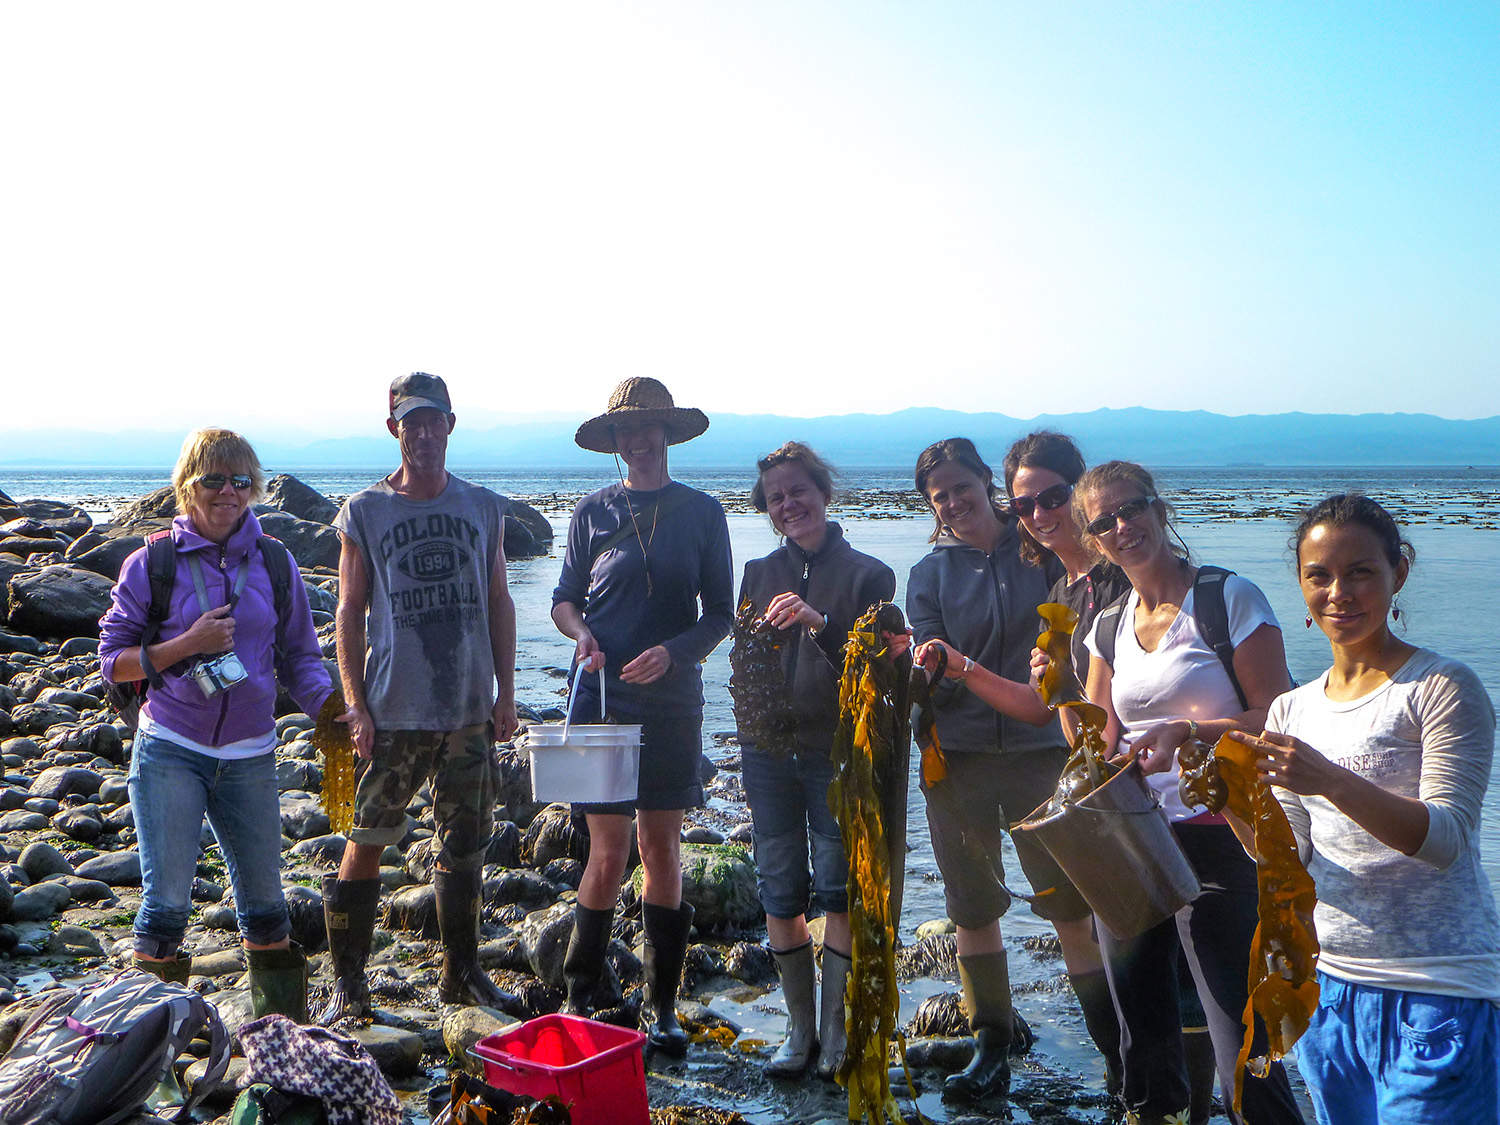  Wild-crafted Seaweed from the Pacific Northwest   